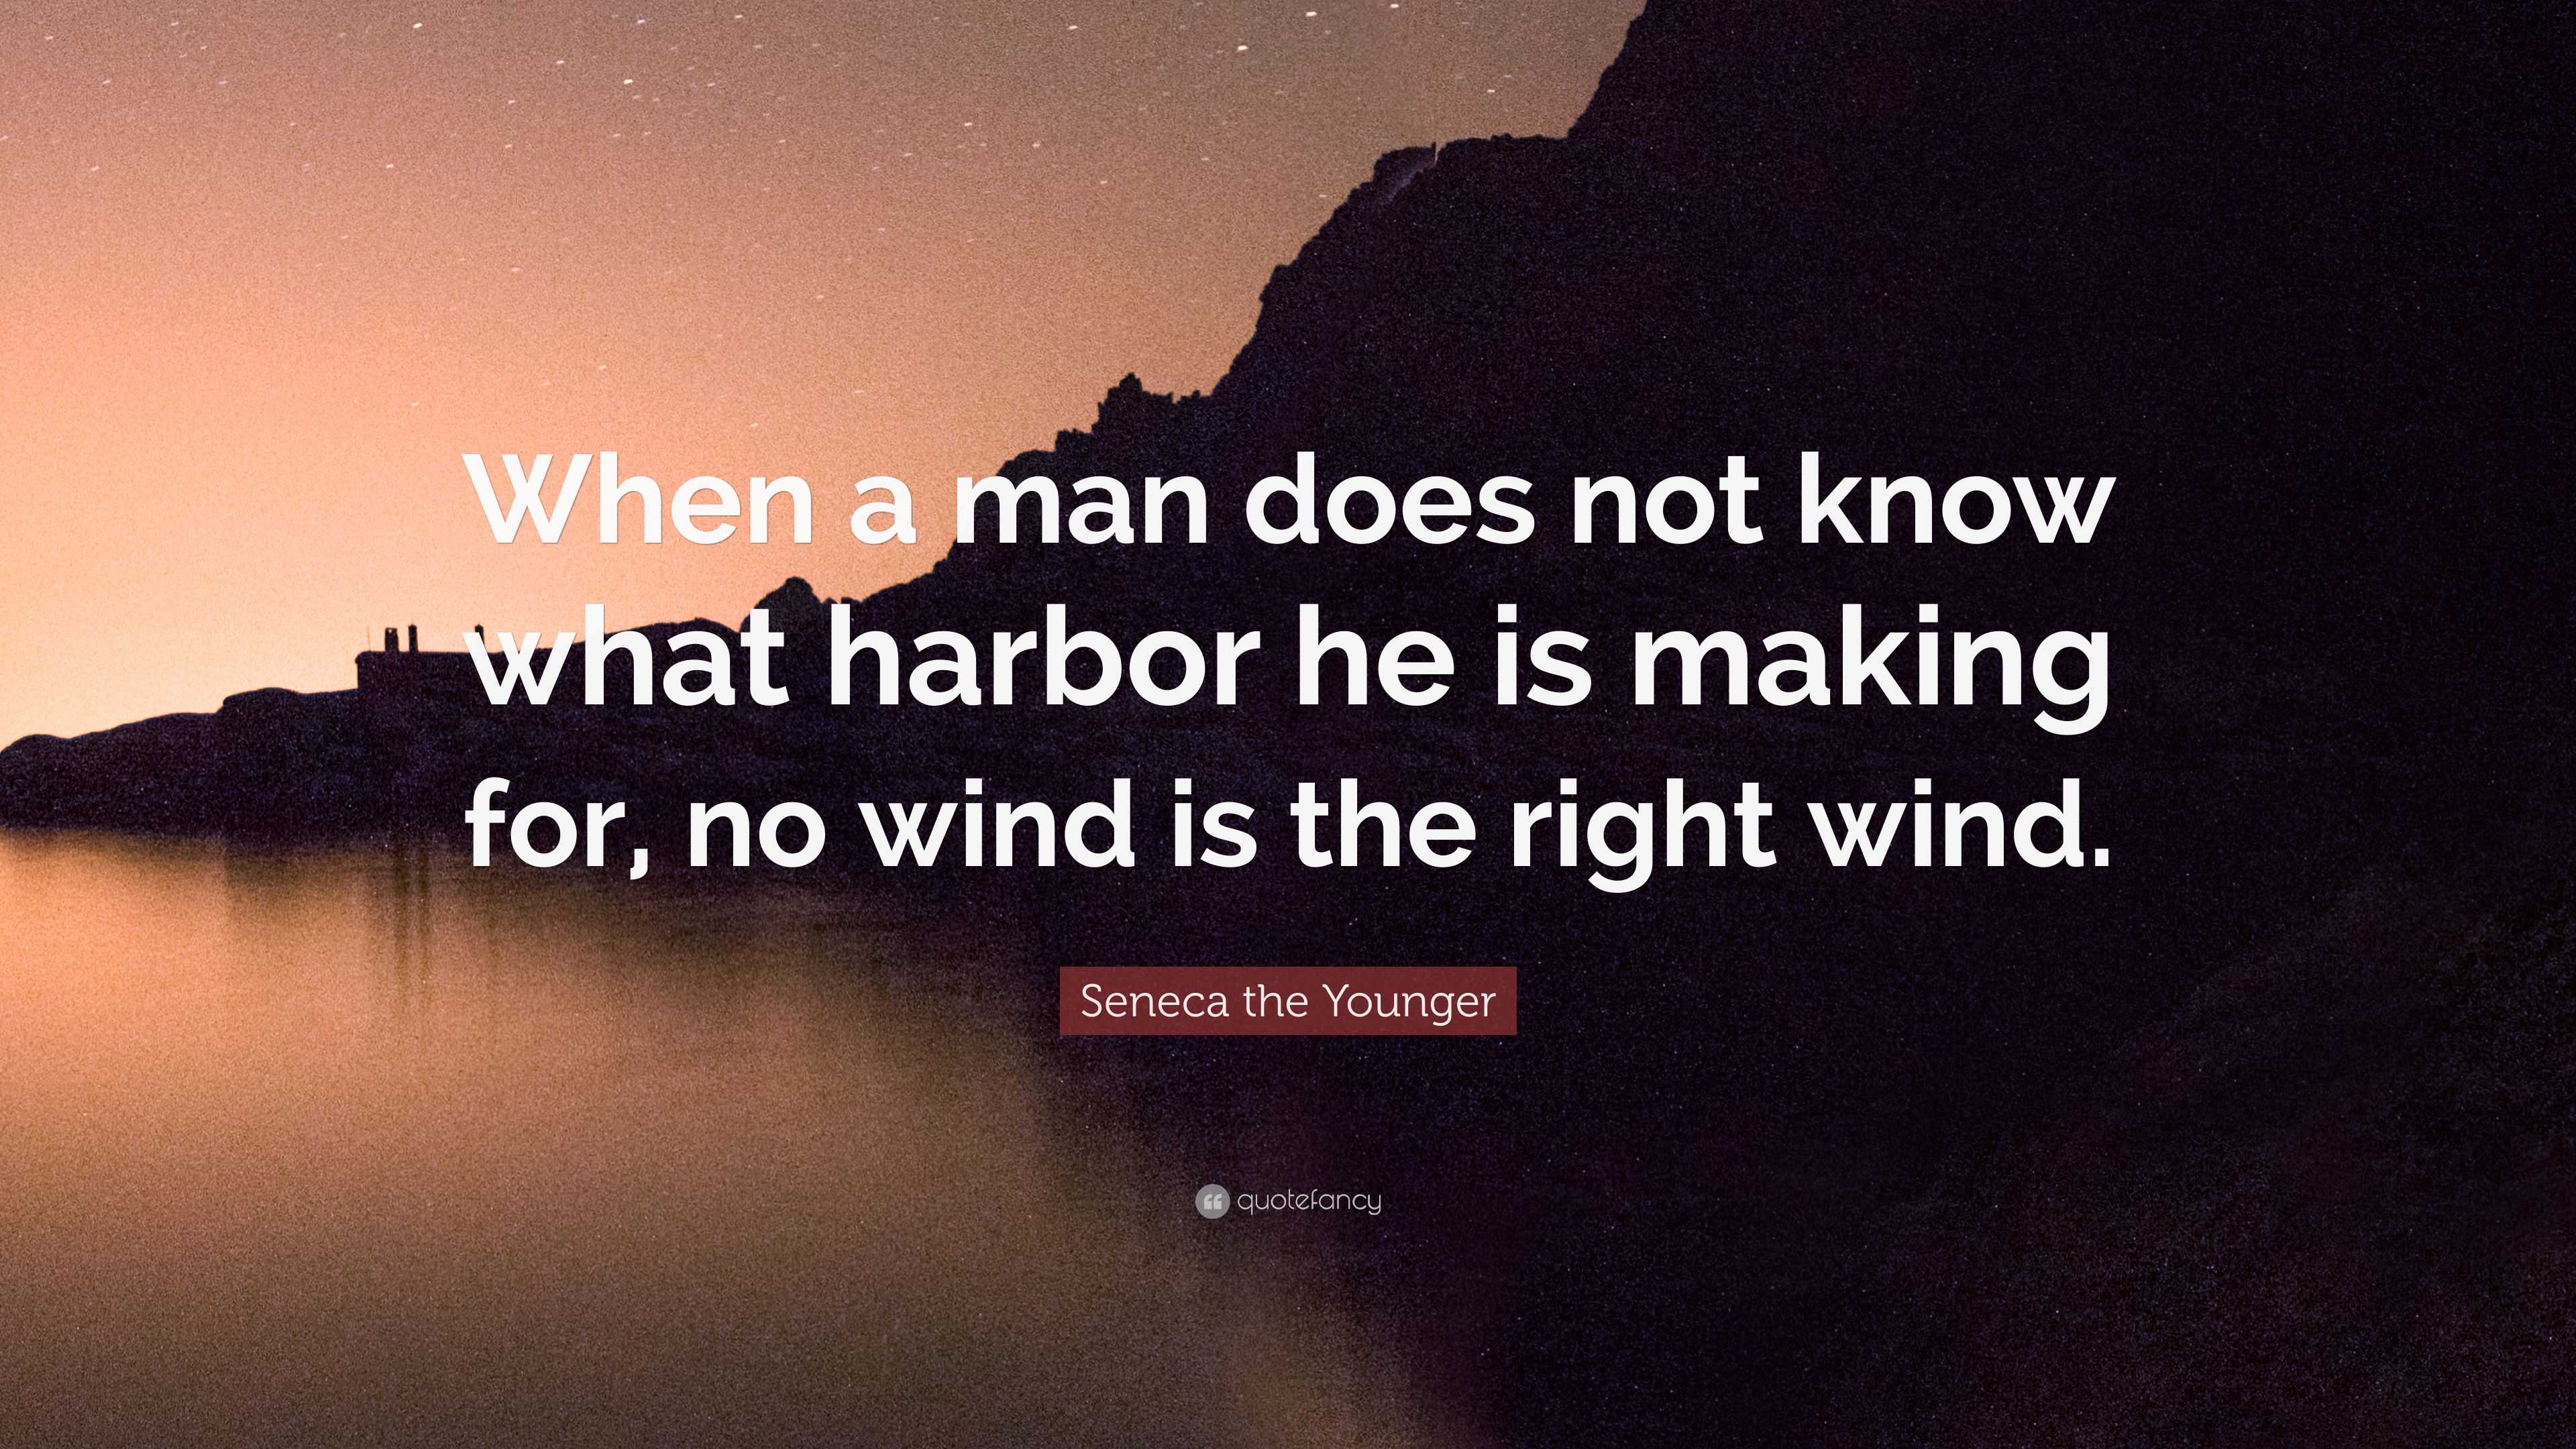 Seneca the Younger Quote “When a man does not know what harbor he is